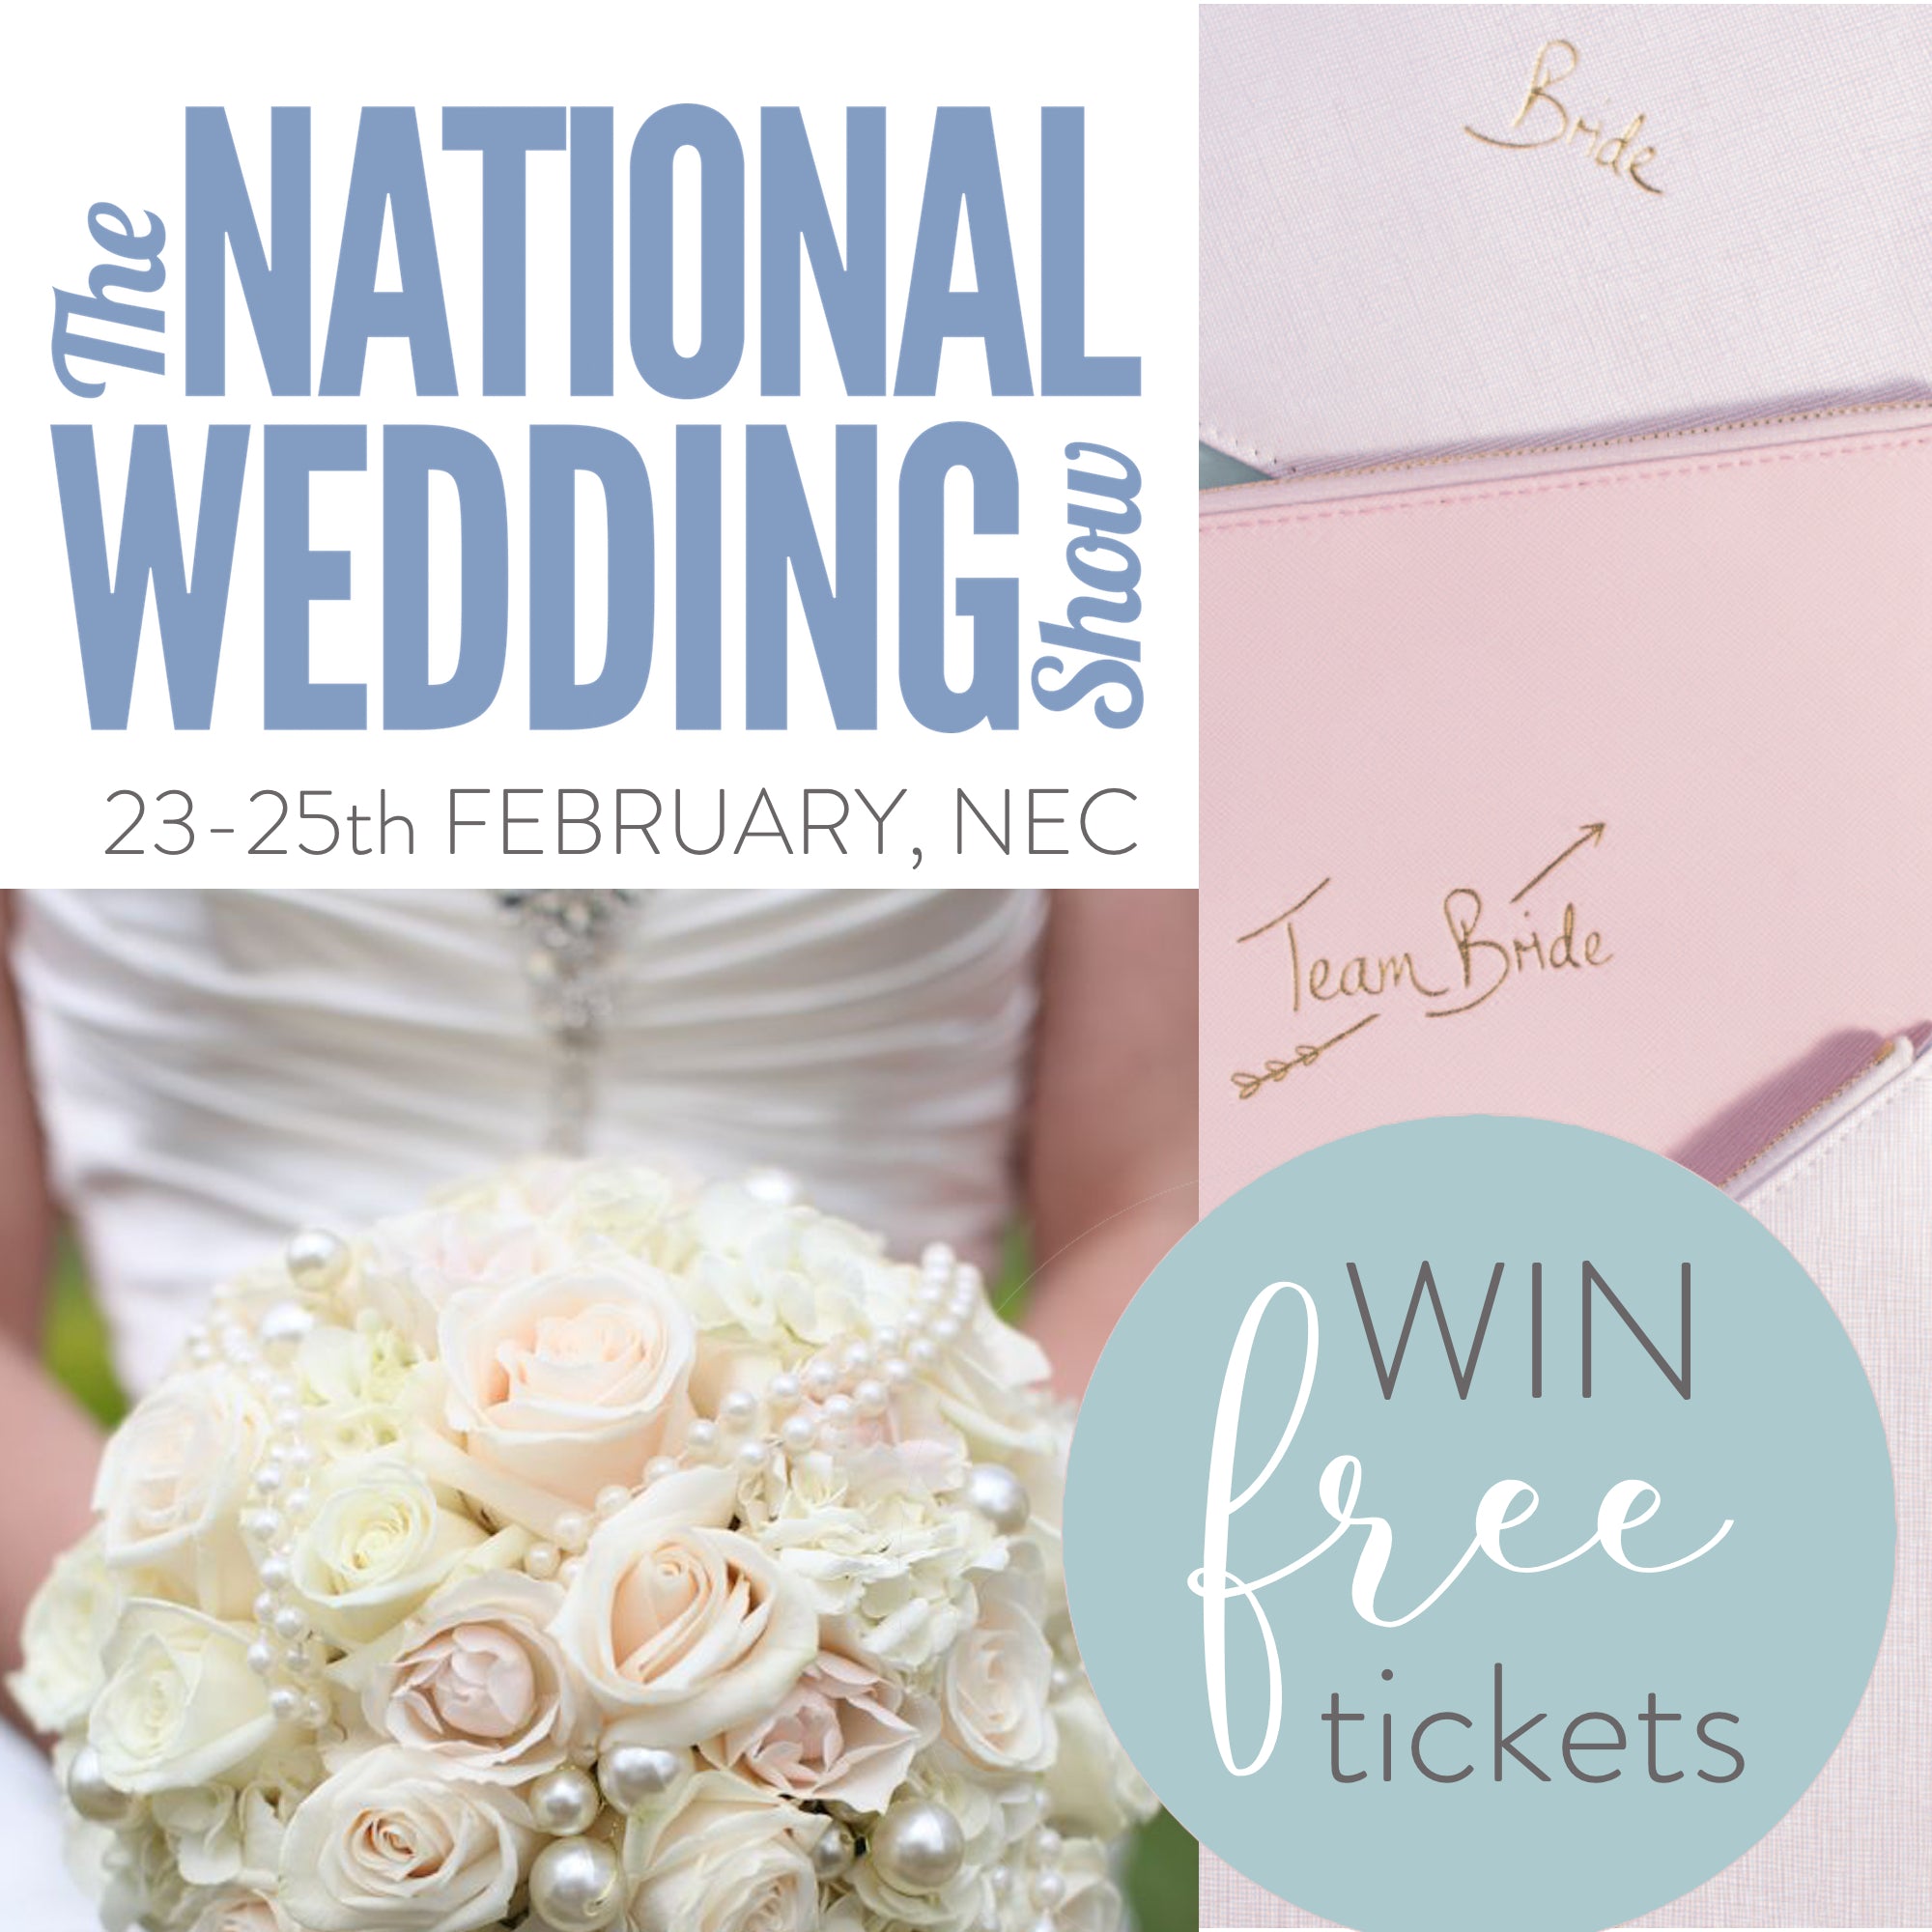 Win FREE Tickets to The National Wedding Show!